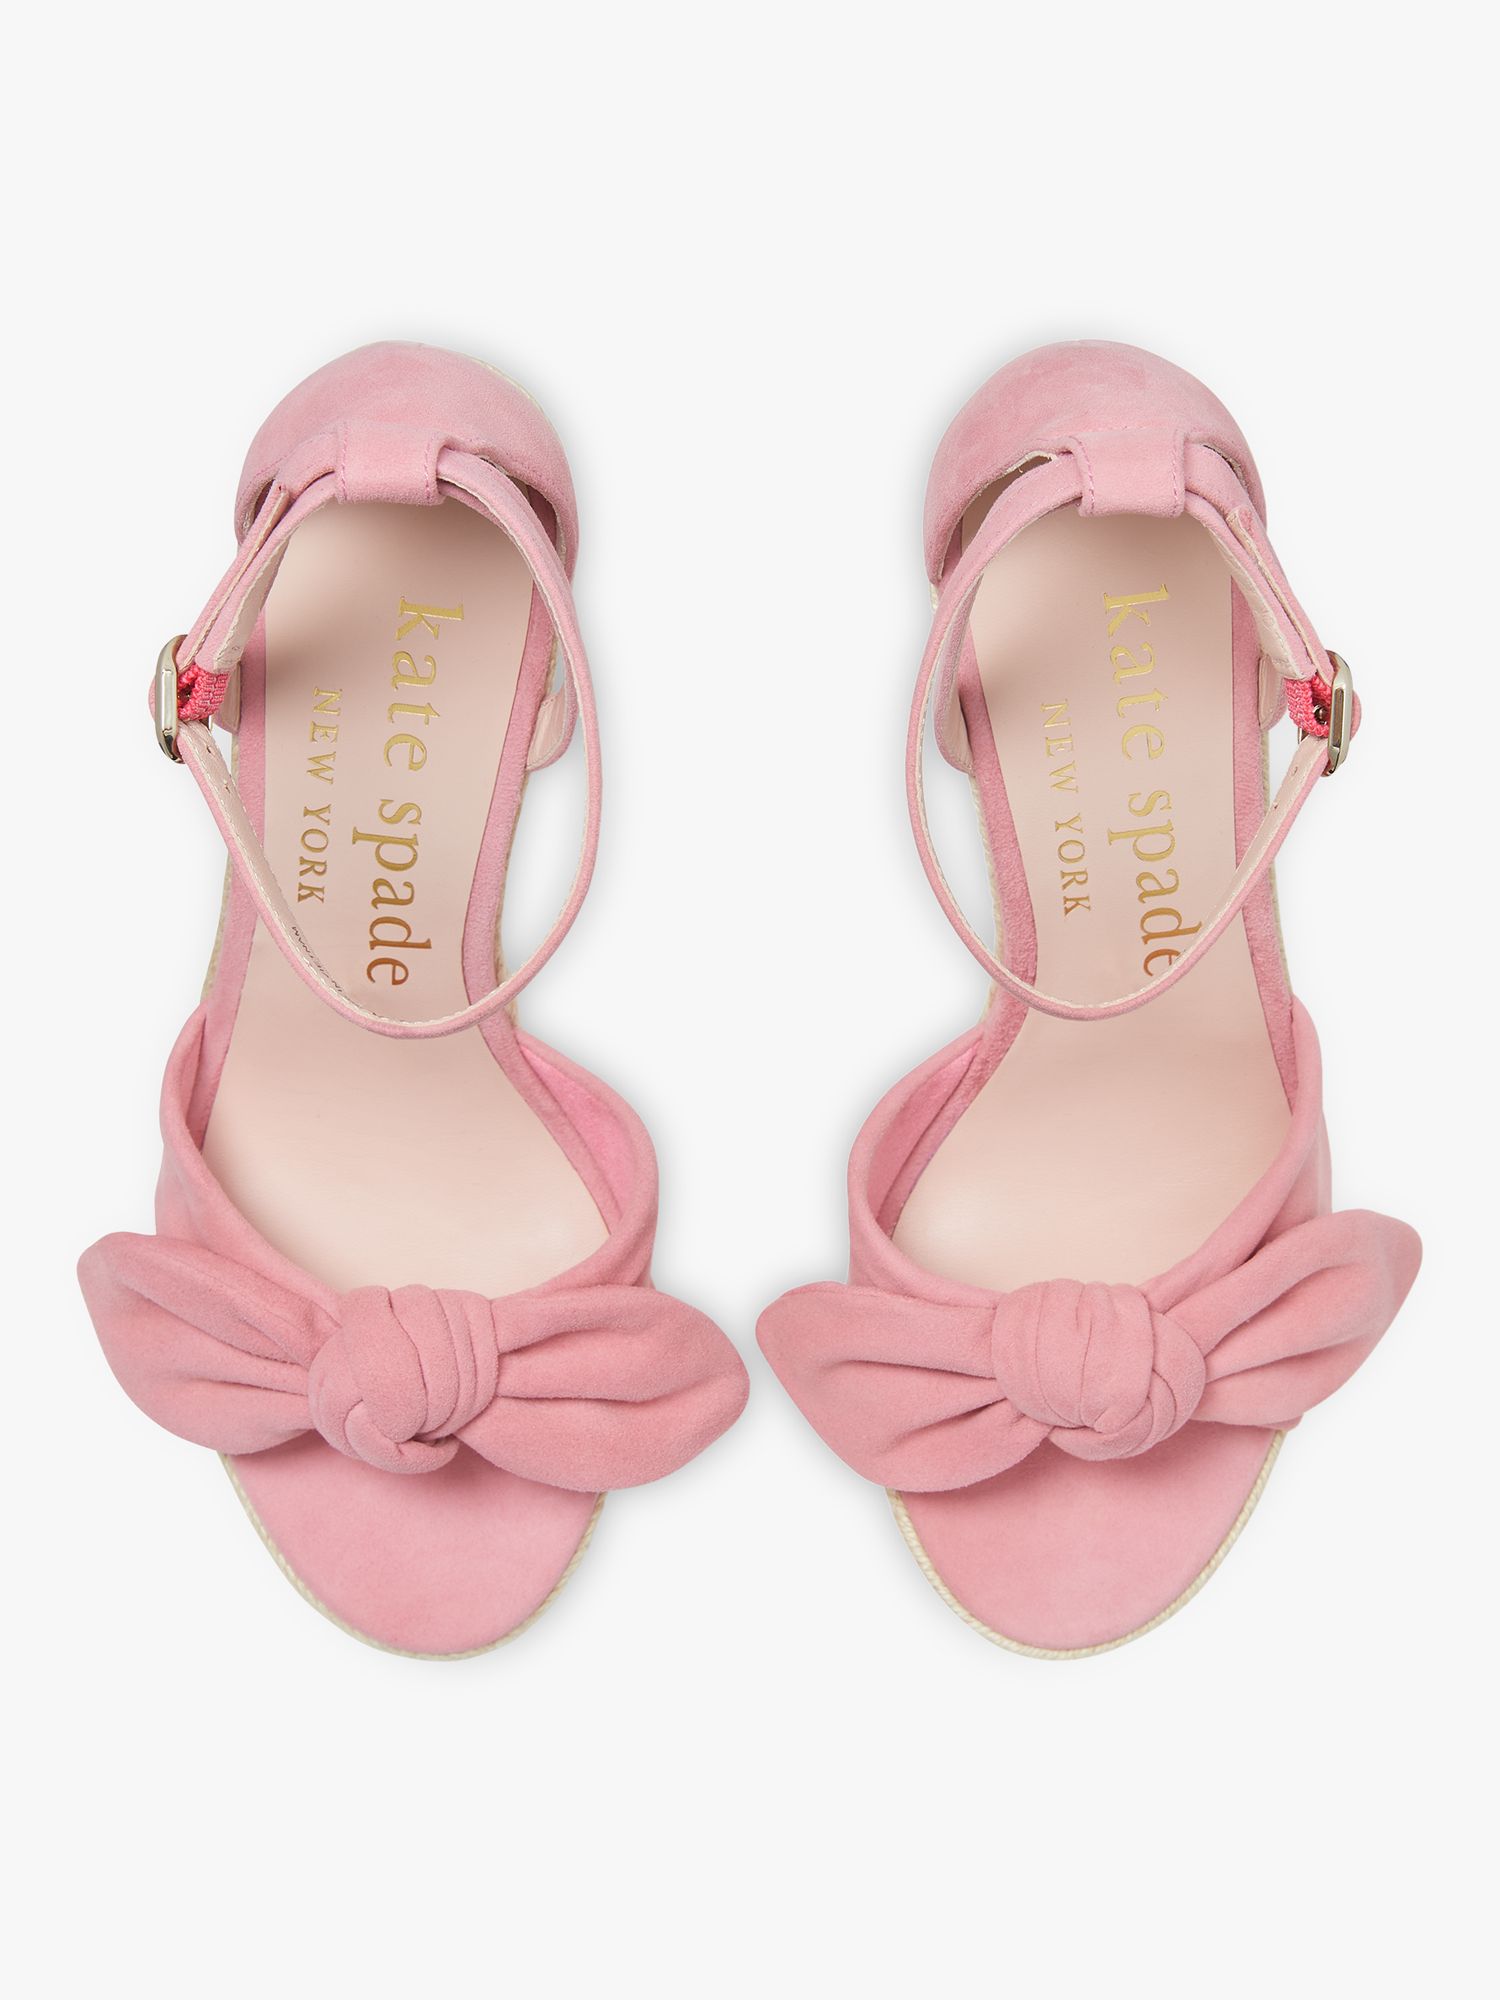 kate spade new york Tianna Bow Wedge Sandals, Rose Otto at John Lewis &  Partners